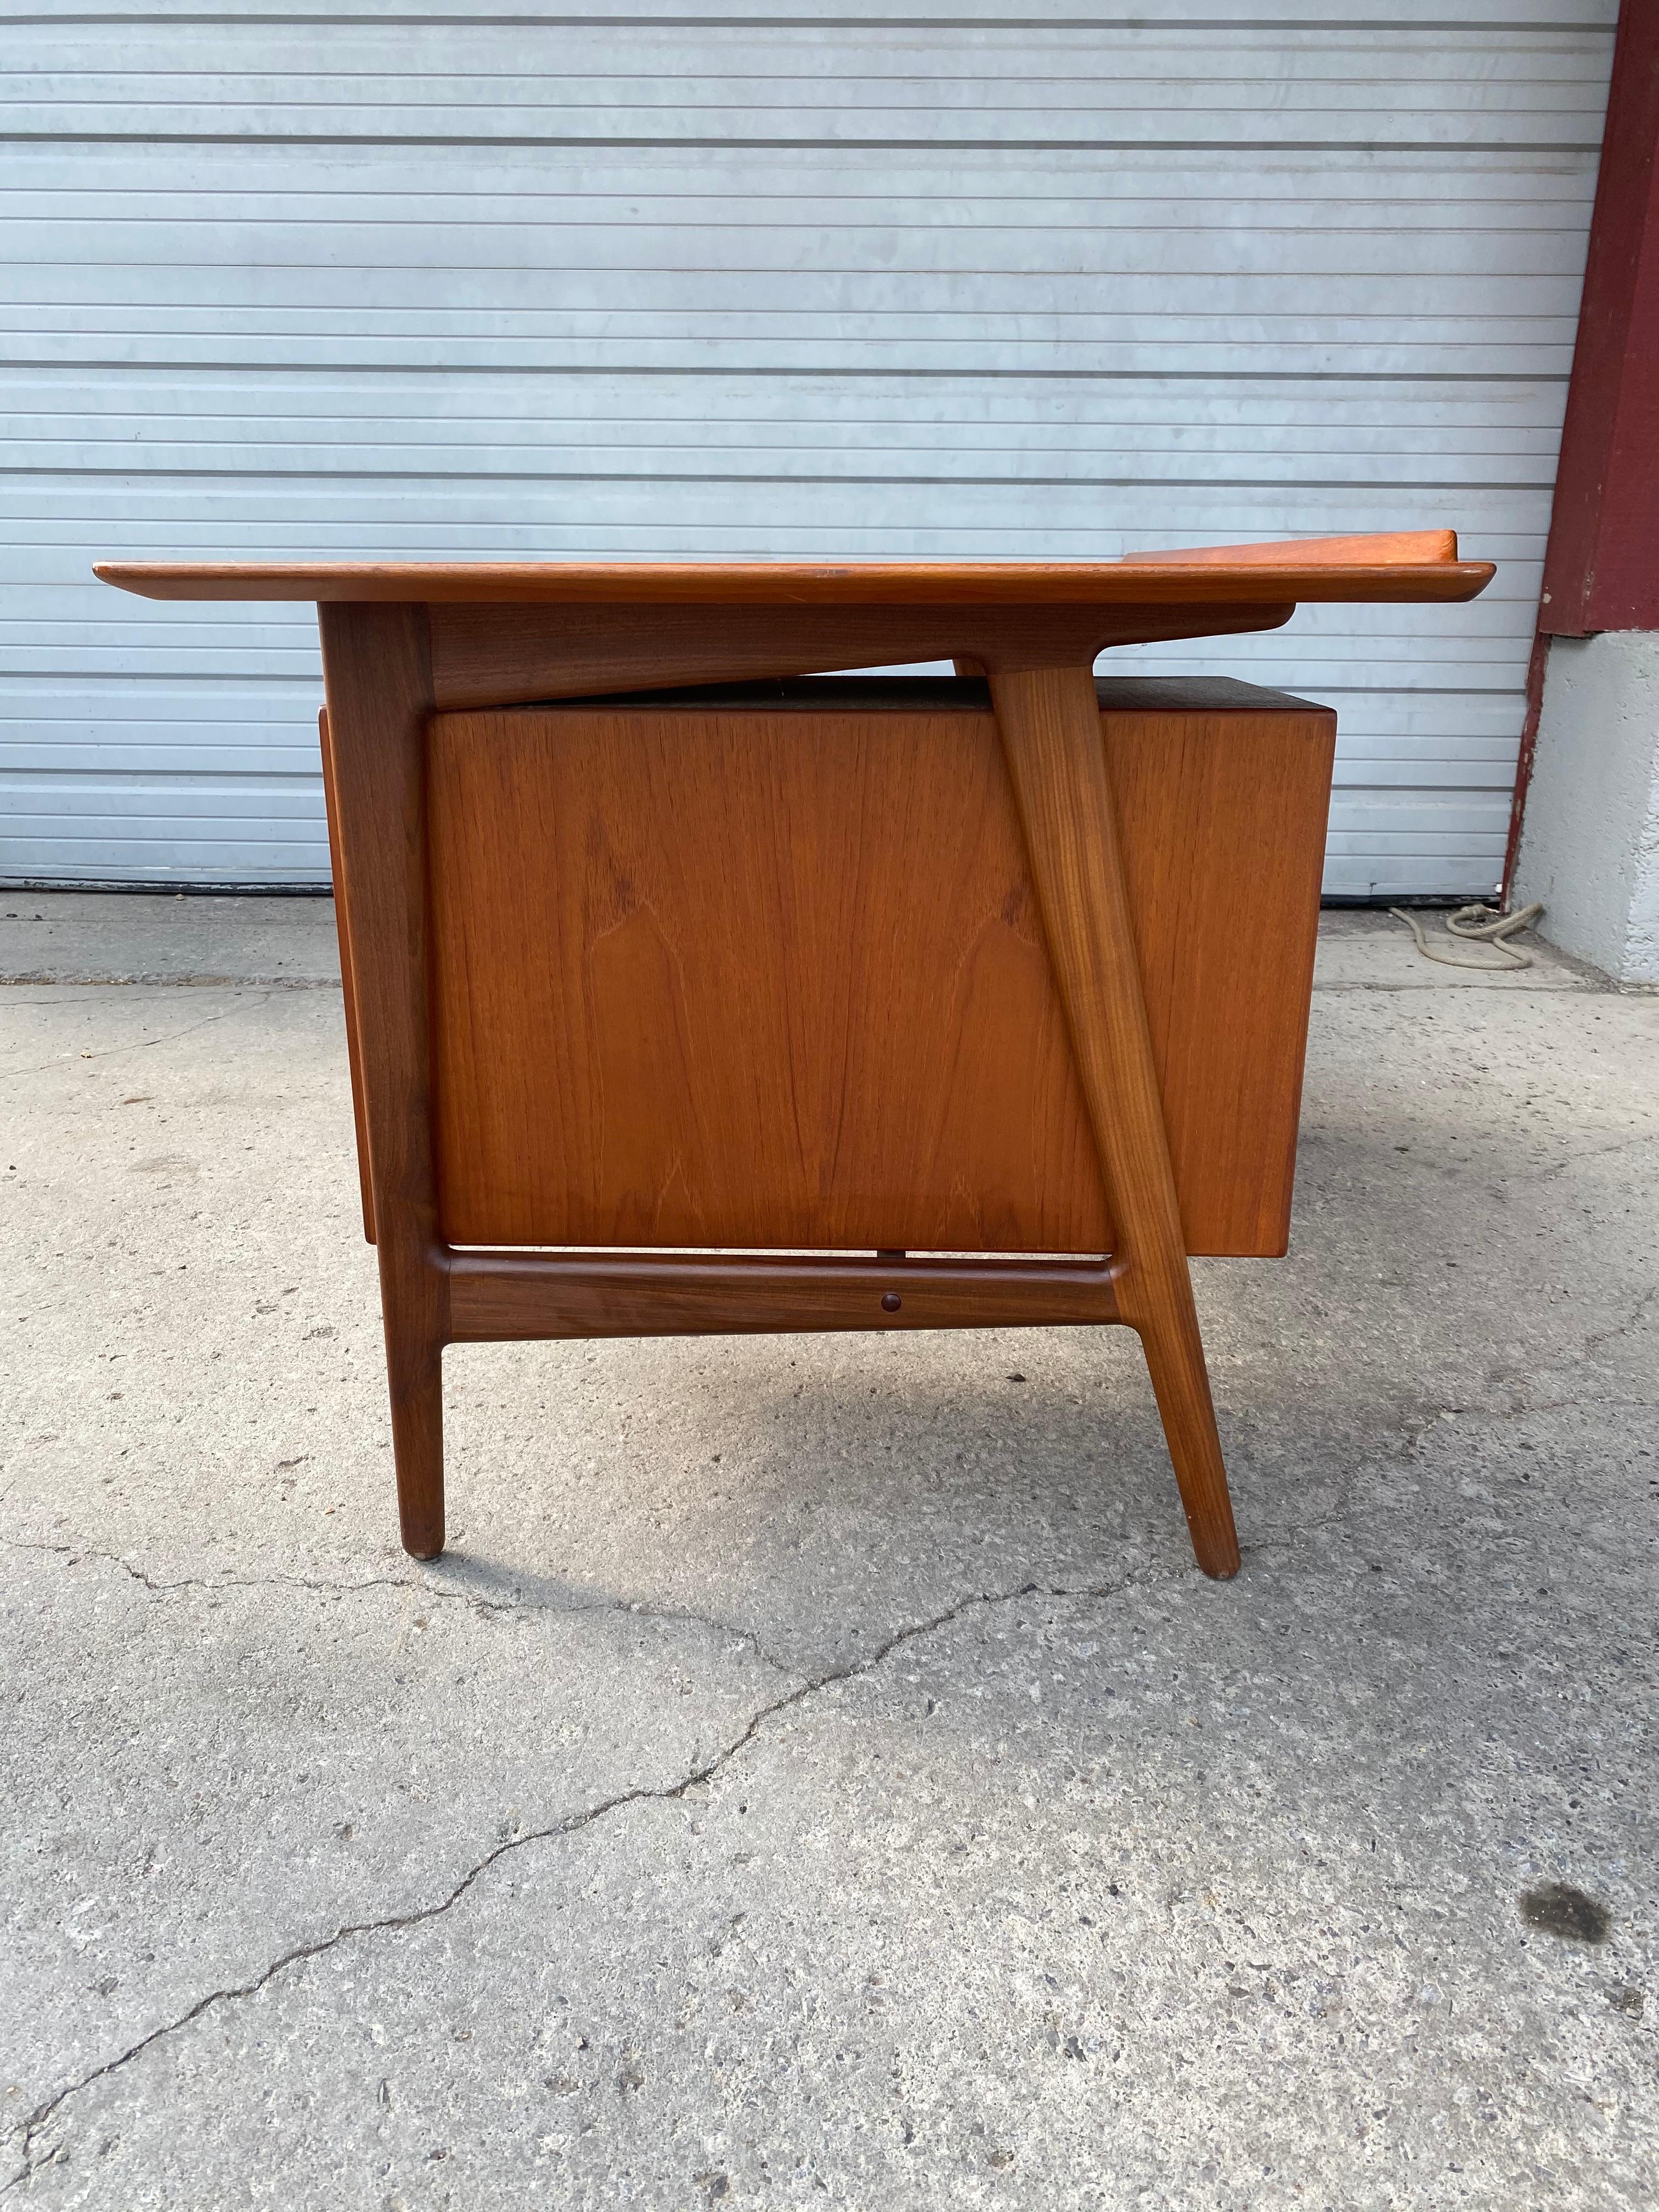 Rare freestanding desk designed by Arne Vodder. Produced by Vamo Sønderborg in Denmark., retains wonderful original finish patina, desk features top drawer and lower file drawer, backside cubbies/ storage, bookcase. Amazing quality, construction and